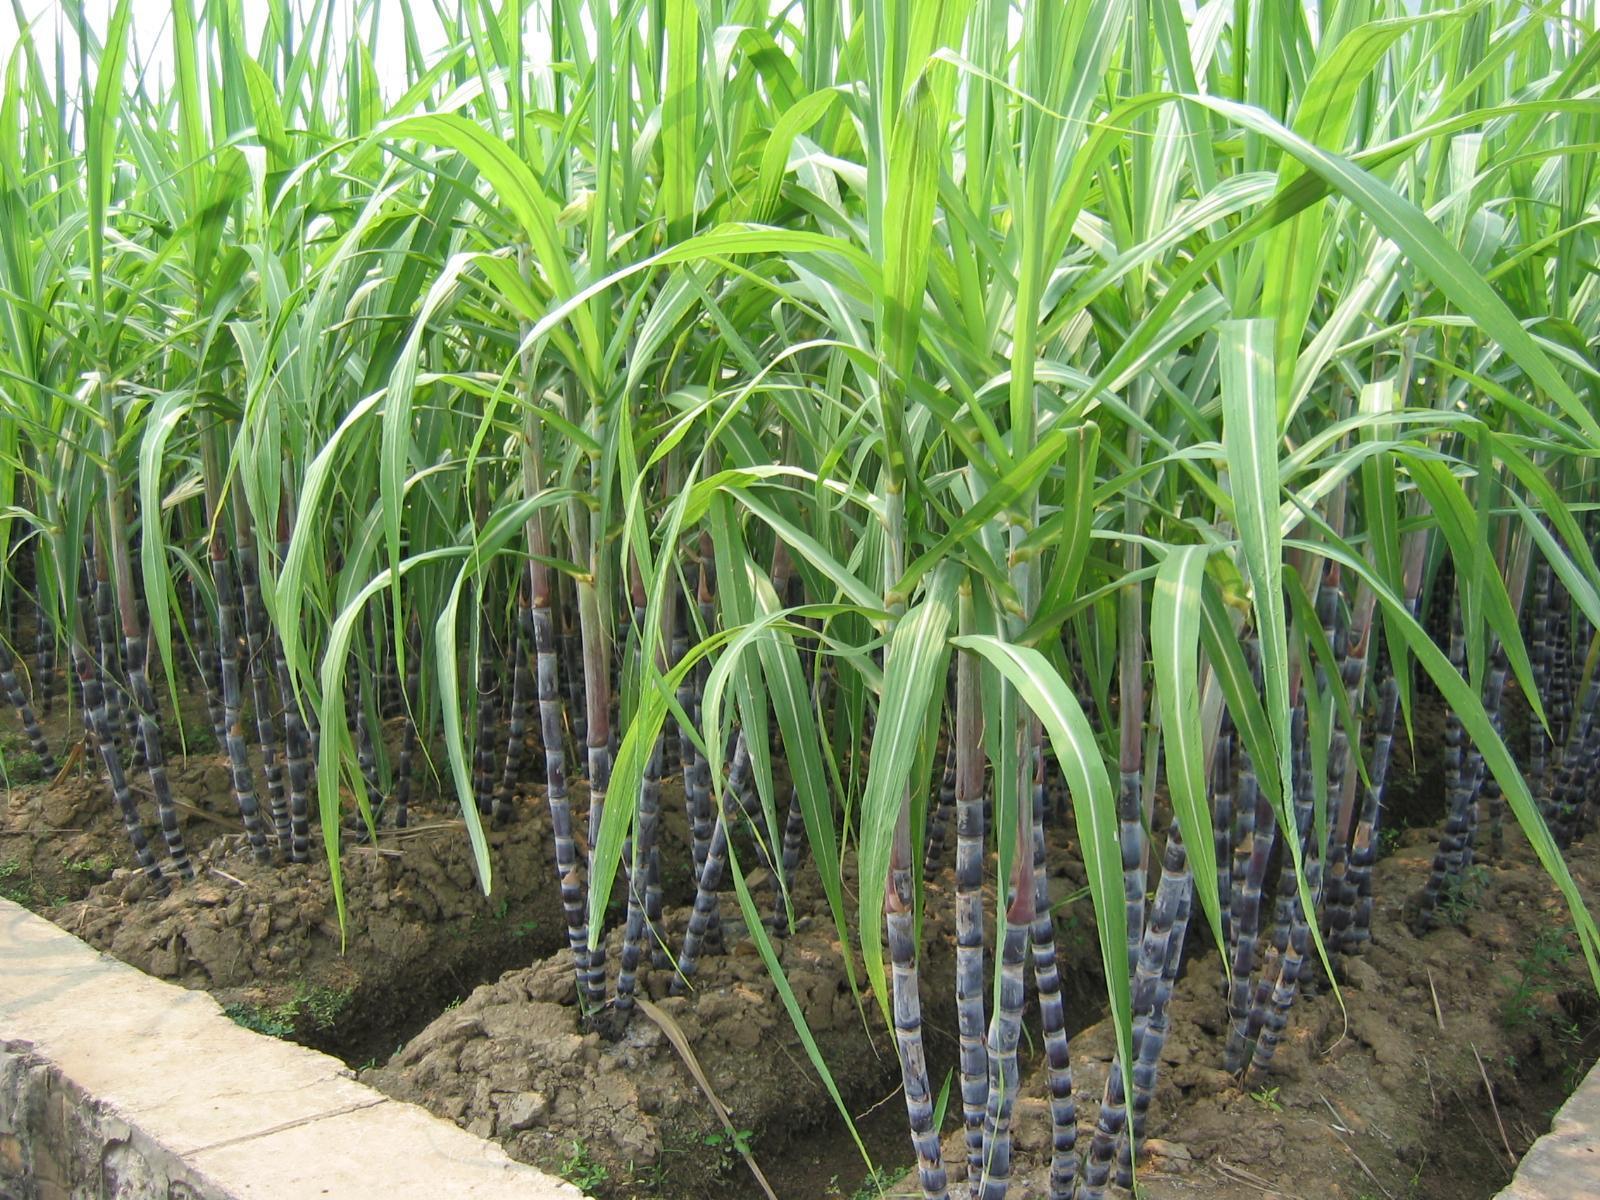 Sugar Cane Crop Wallpaper image Pics for Research Work